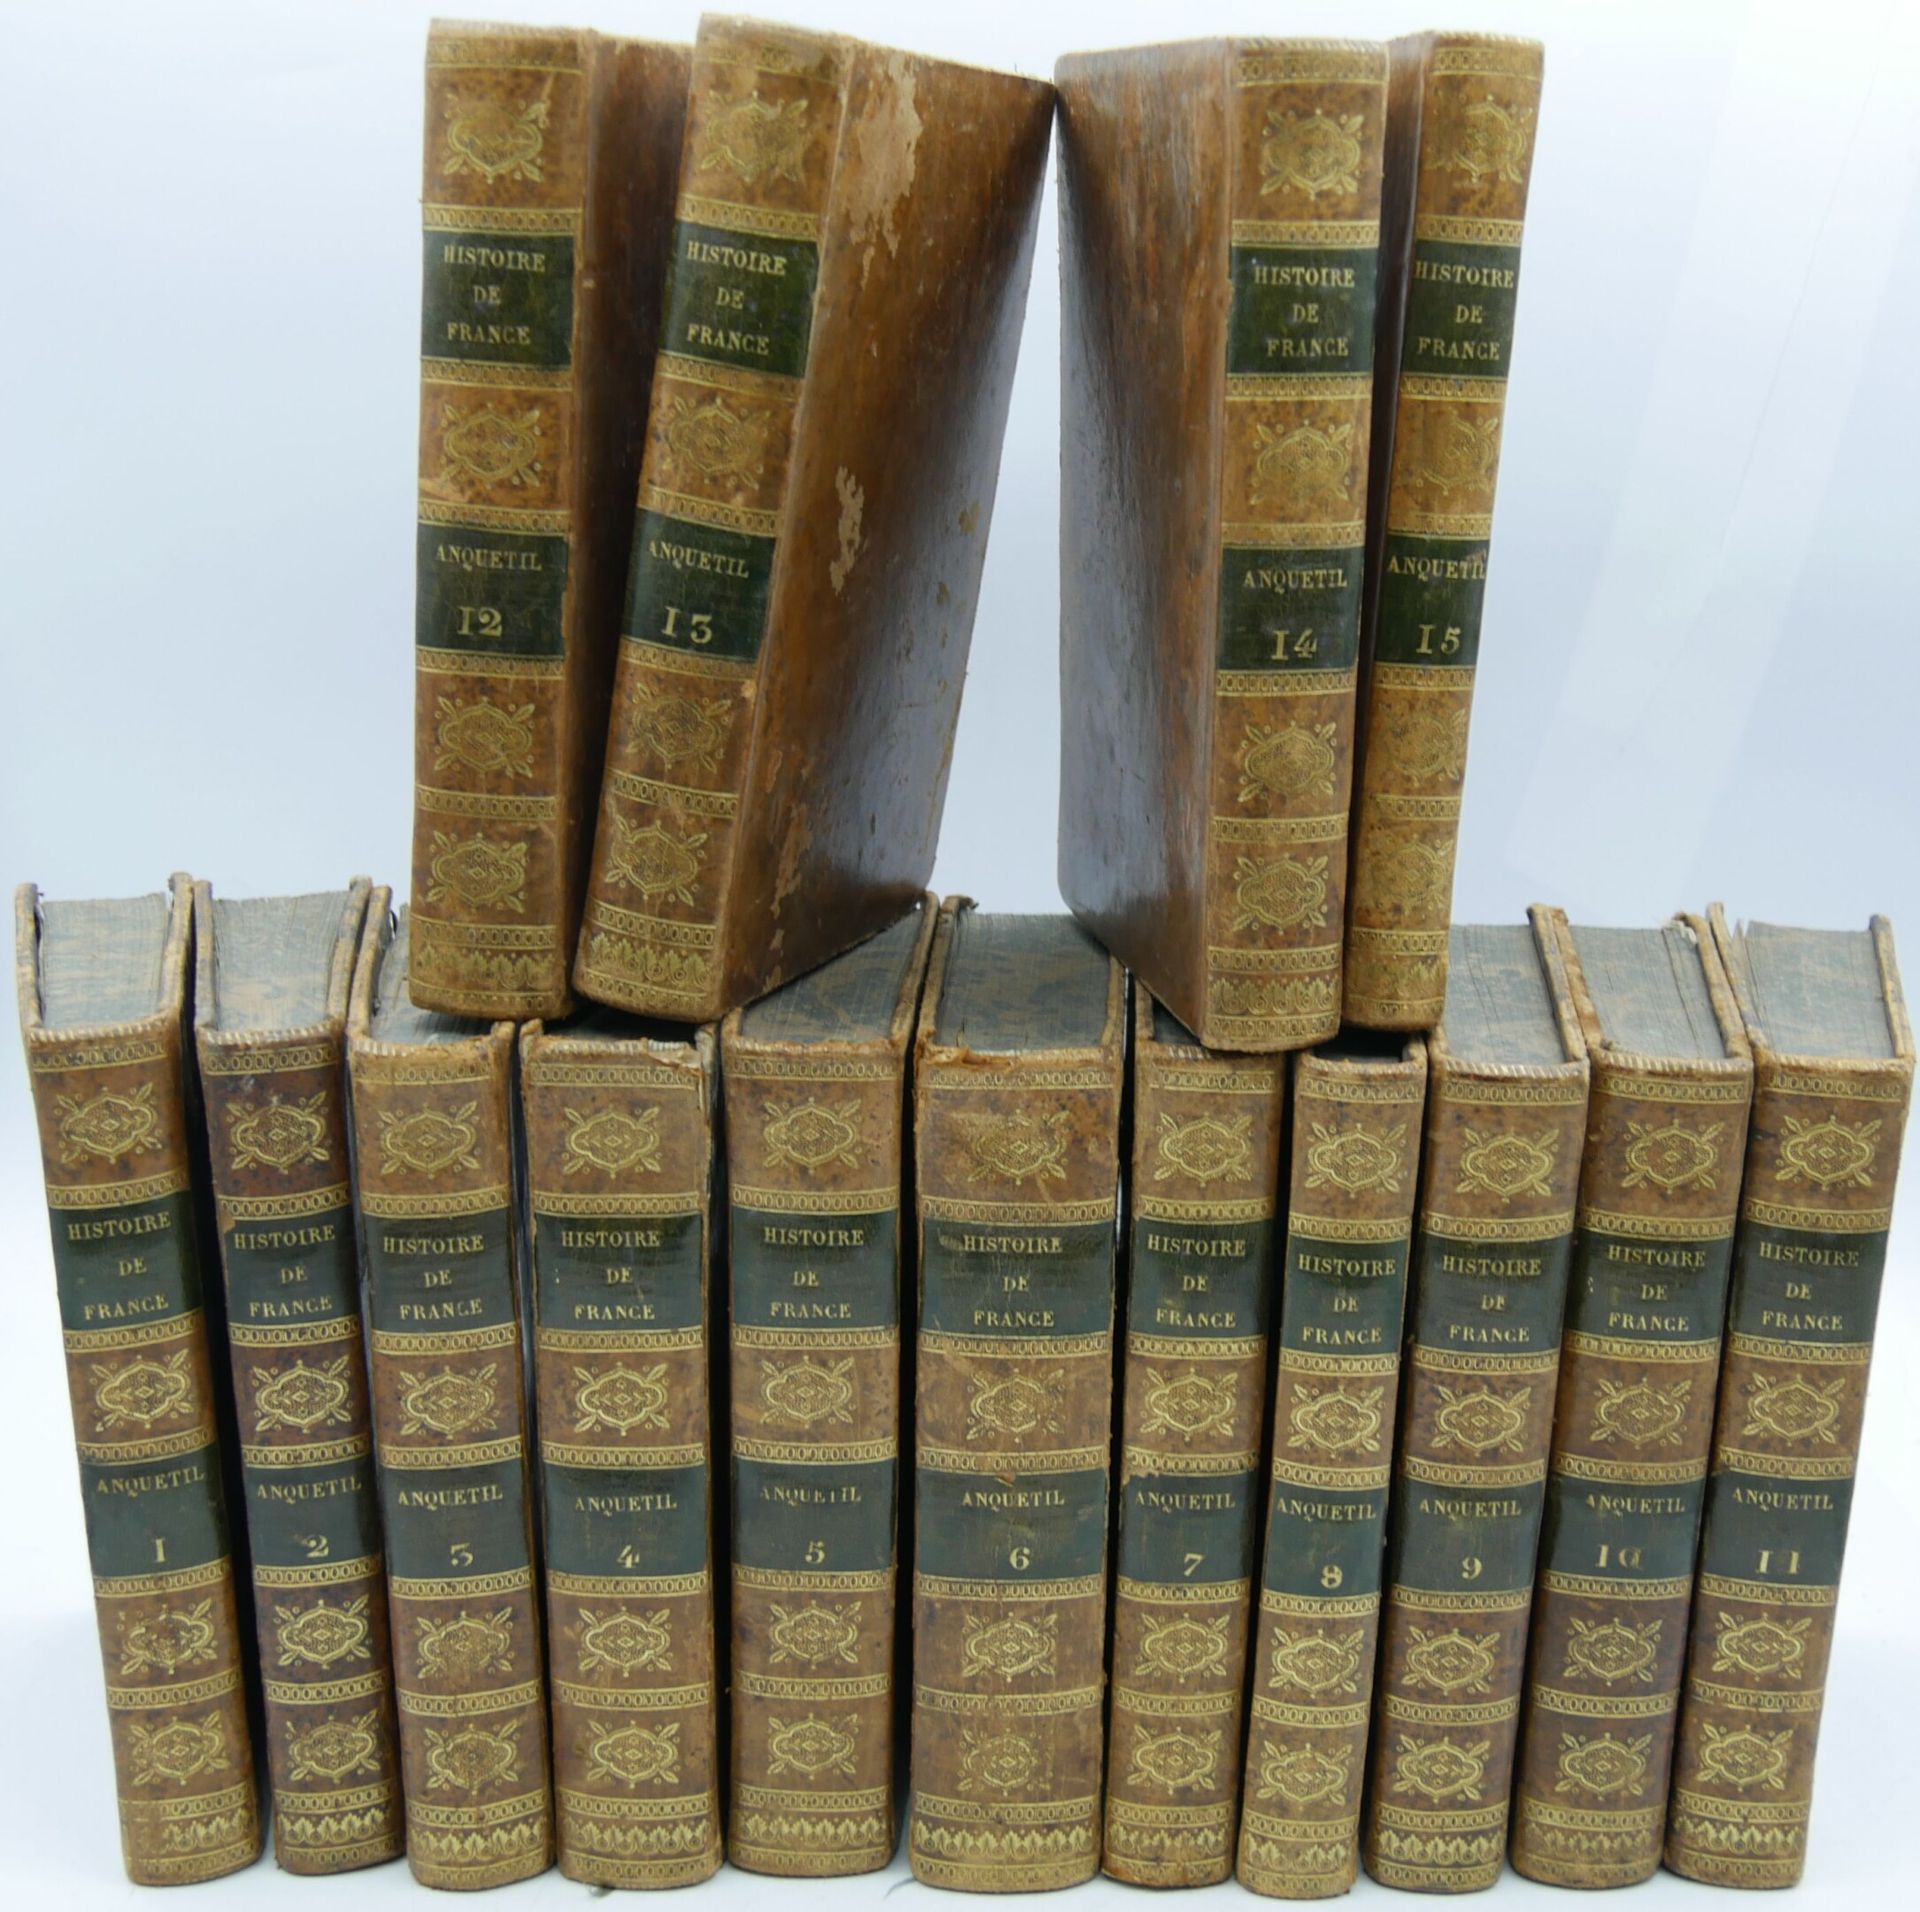 Null HISTOIRE DE France]. Together 21 Volumes. Antique bindings.

15 Volumes : A&hellip;